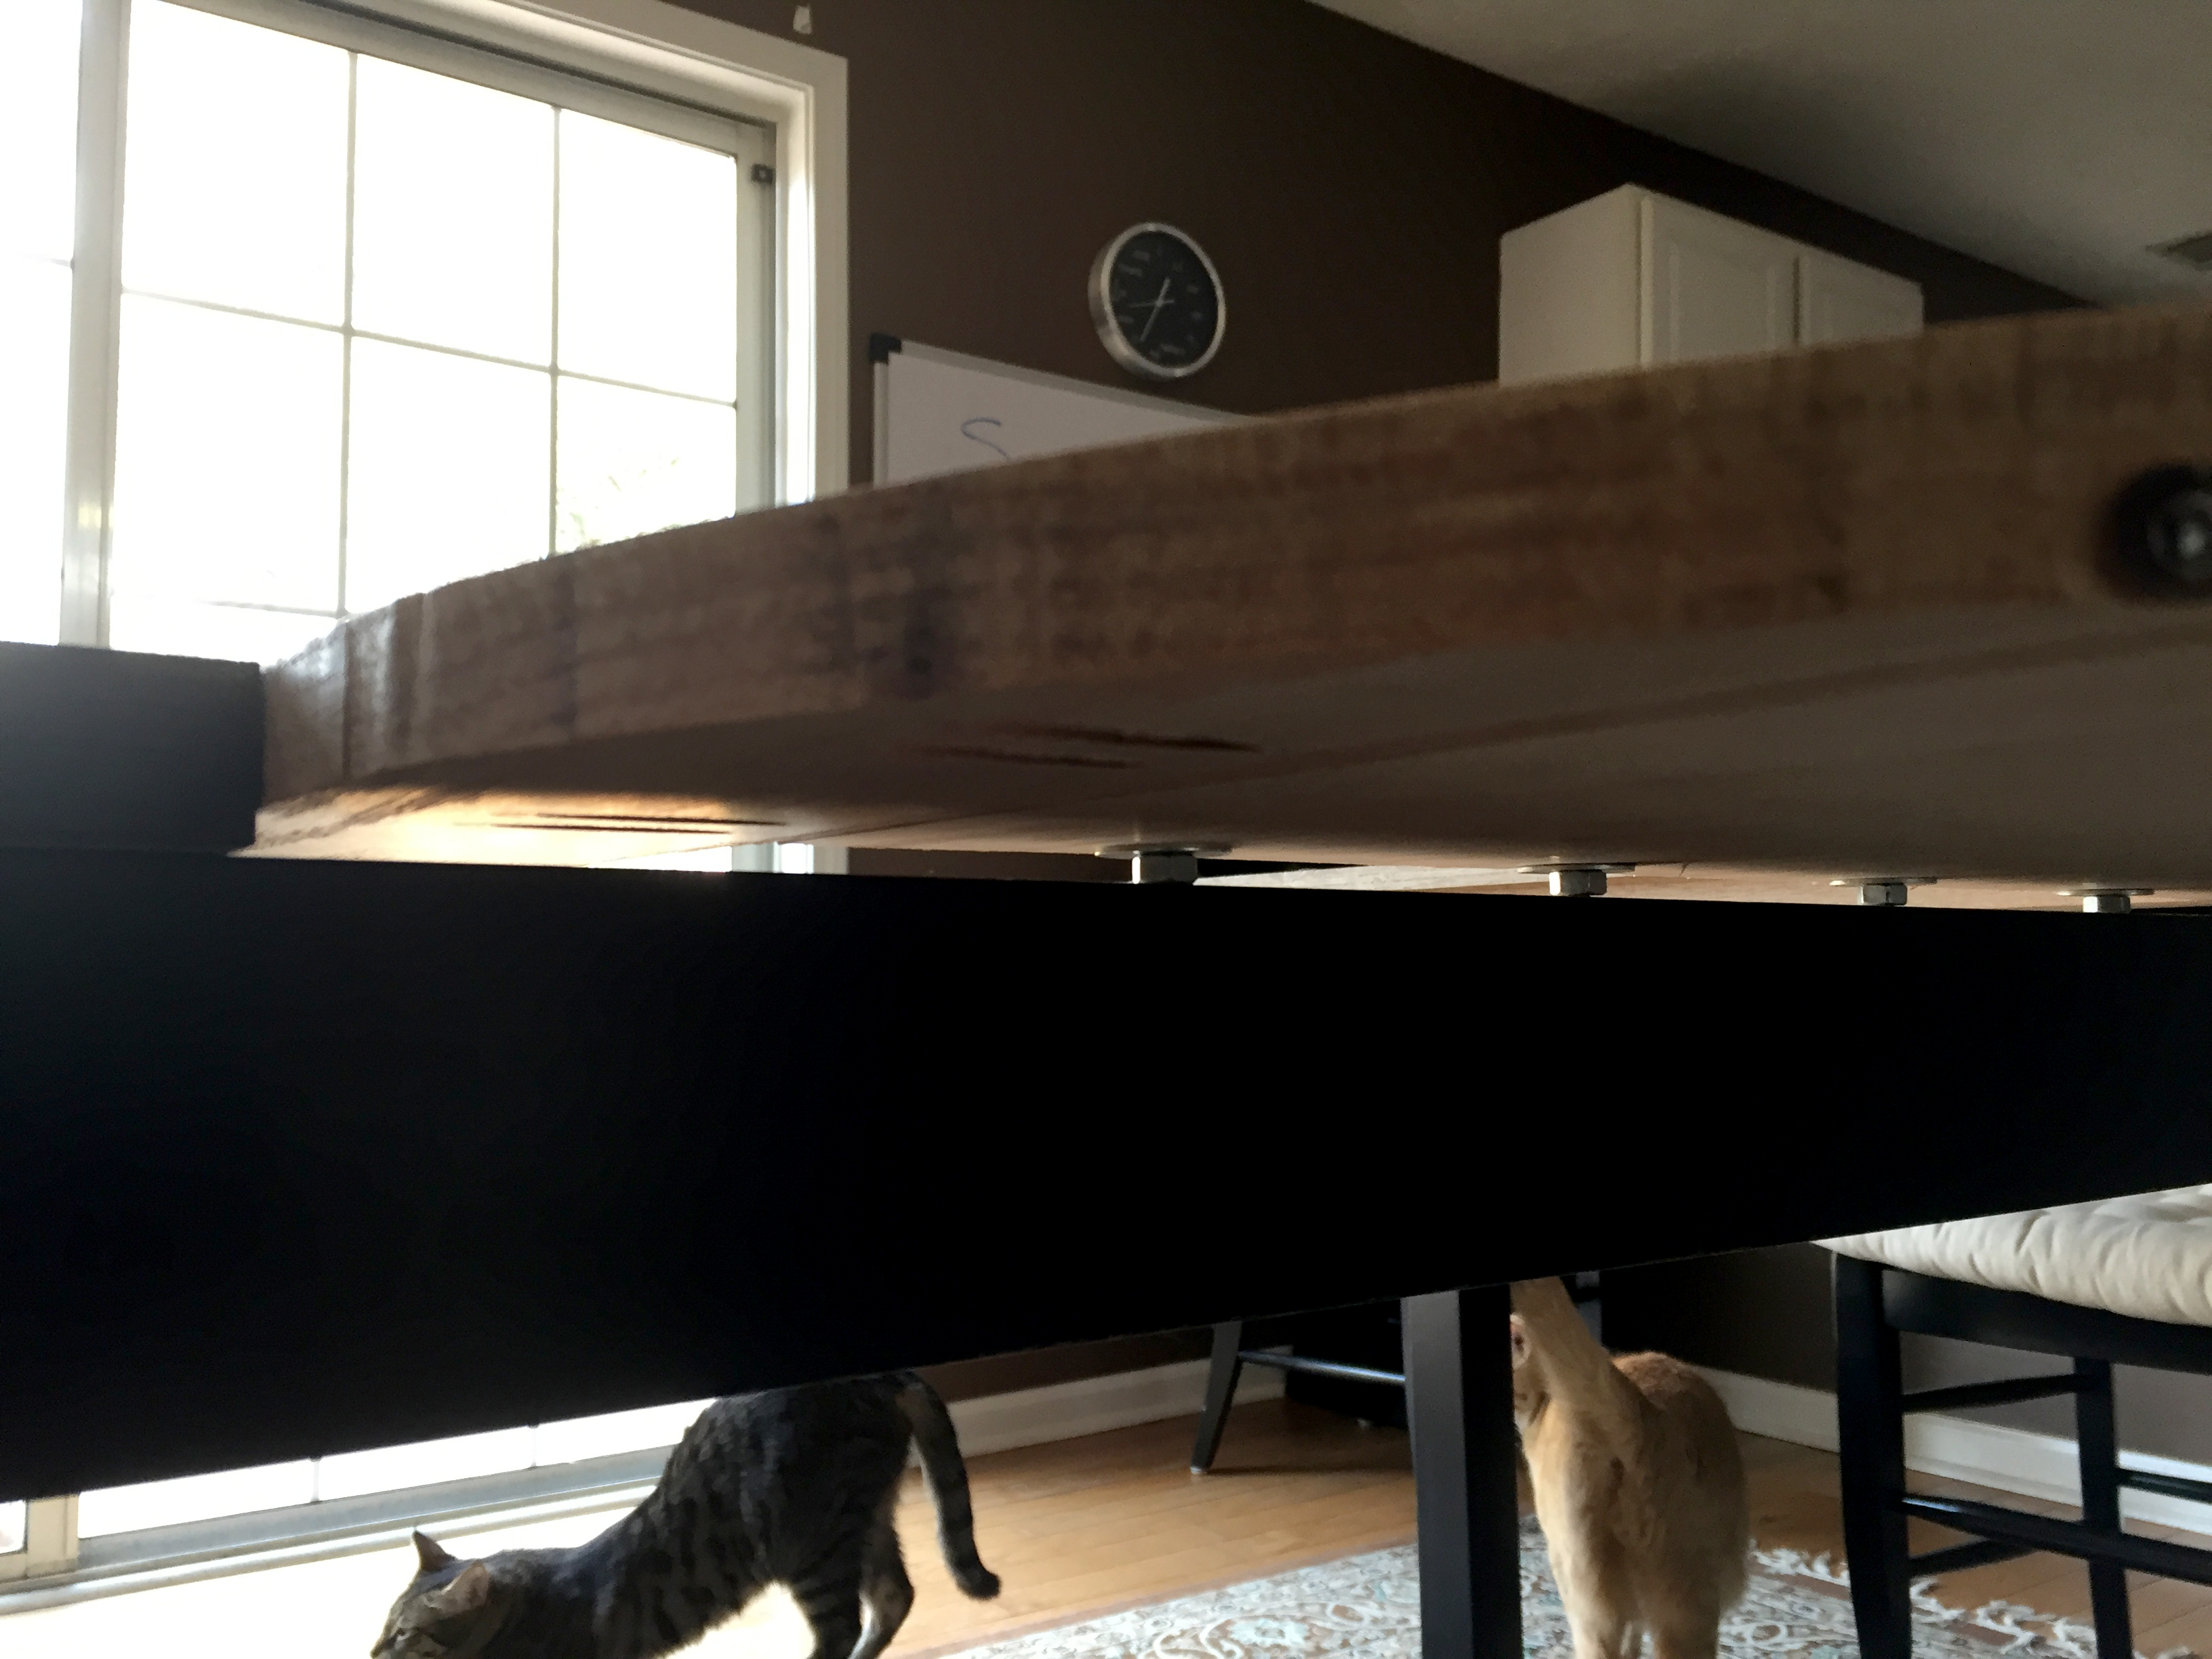 "I had a slight heart attack when I realized that the nuts for the bolts were exactly where the tables rails were located. Thankfully I managed to get bolts that were just the right size that when tightened with a washer and lock-washer the height was perfect to bring the top of the gaming table flush with the actual table.", you can see what his cat thinks about all of this.